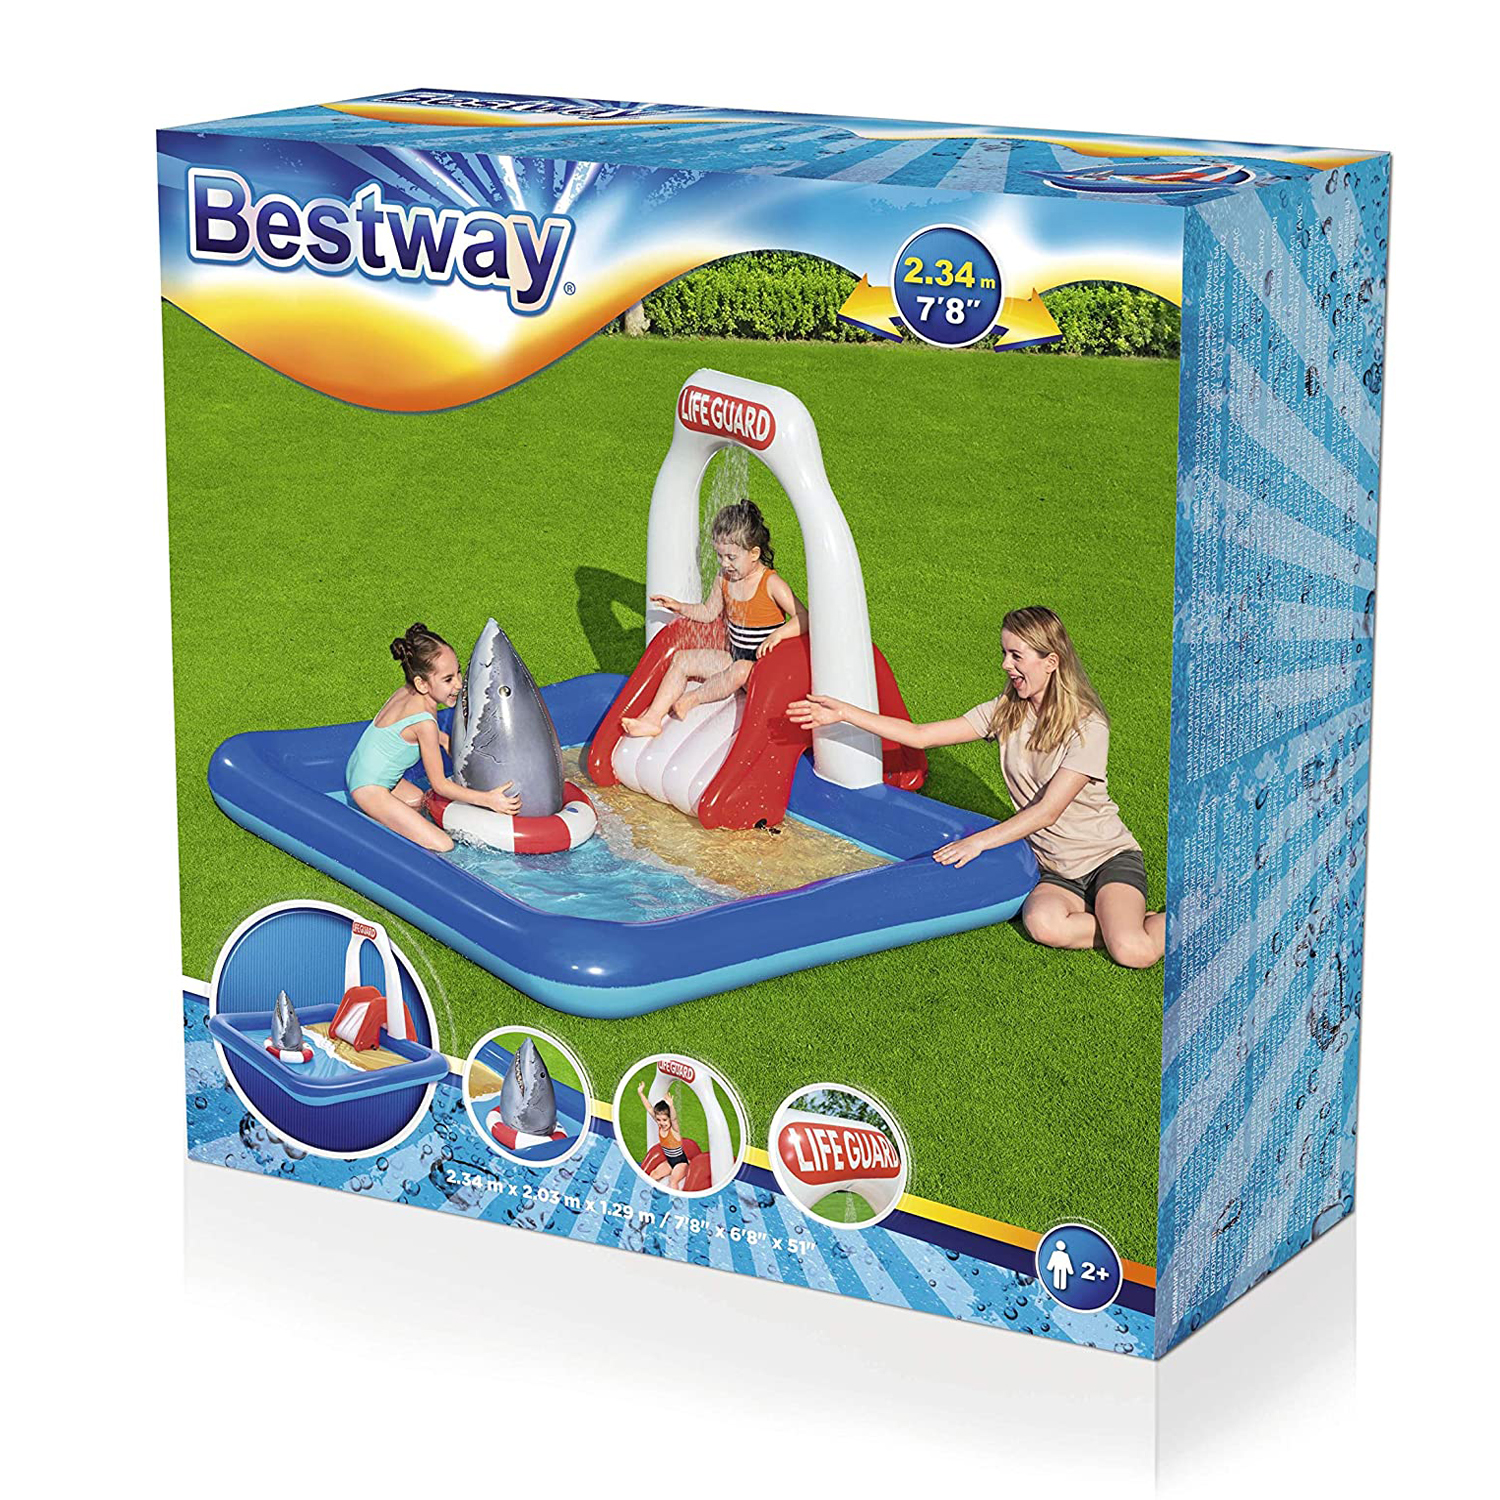 3 x New in Box BESTWAY Kids Inflatable Lifeguard Tower Play Centre Paddling Pool RRP £49.99 each   Ref (C)